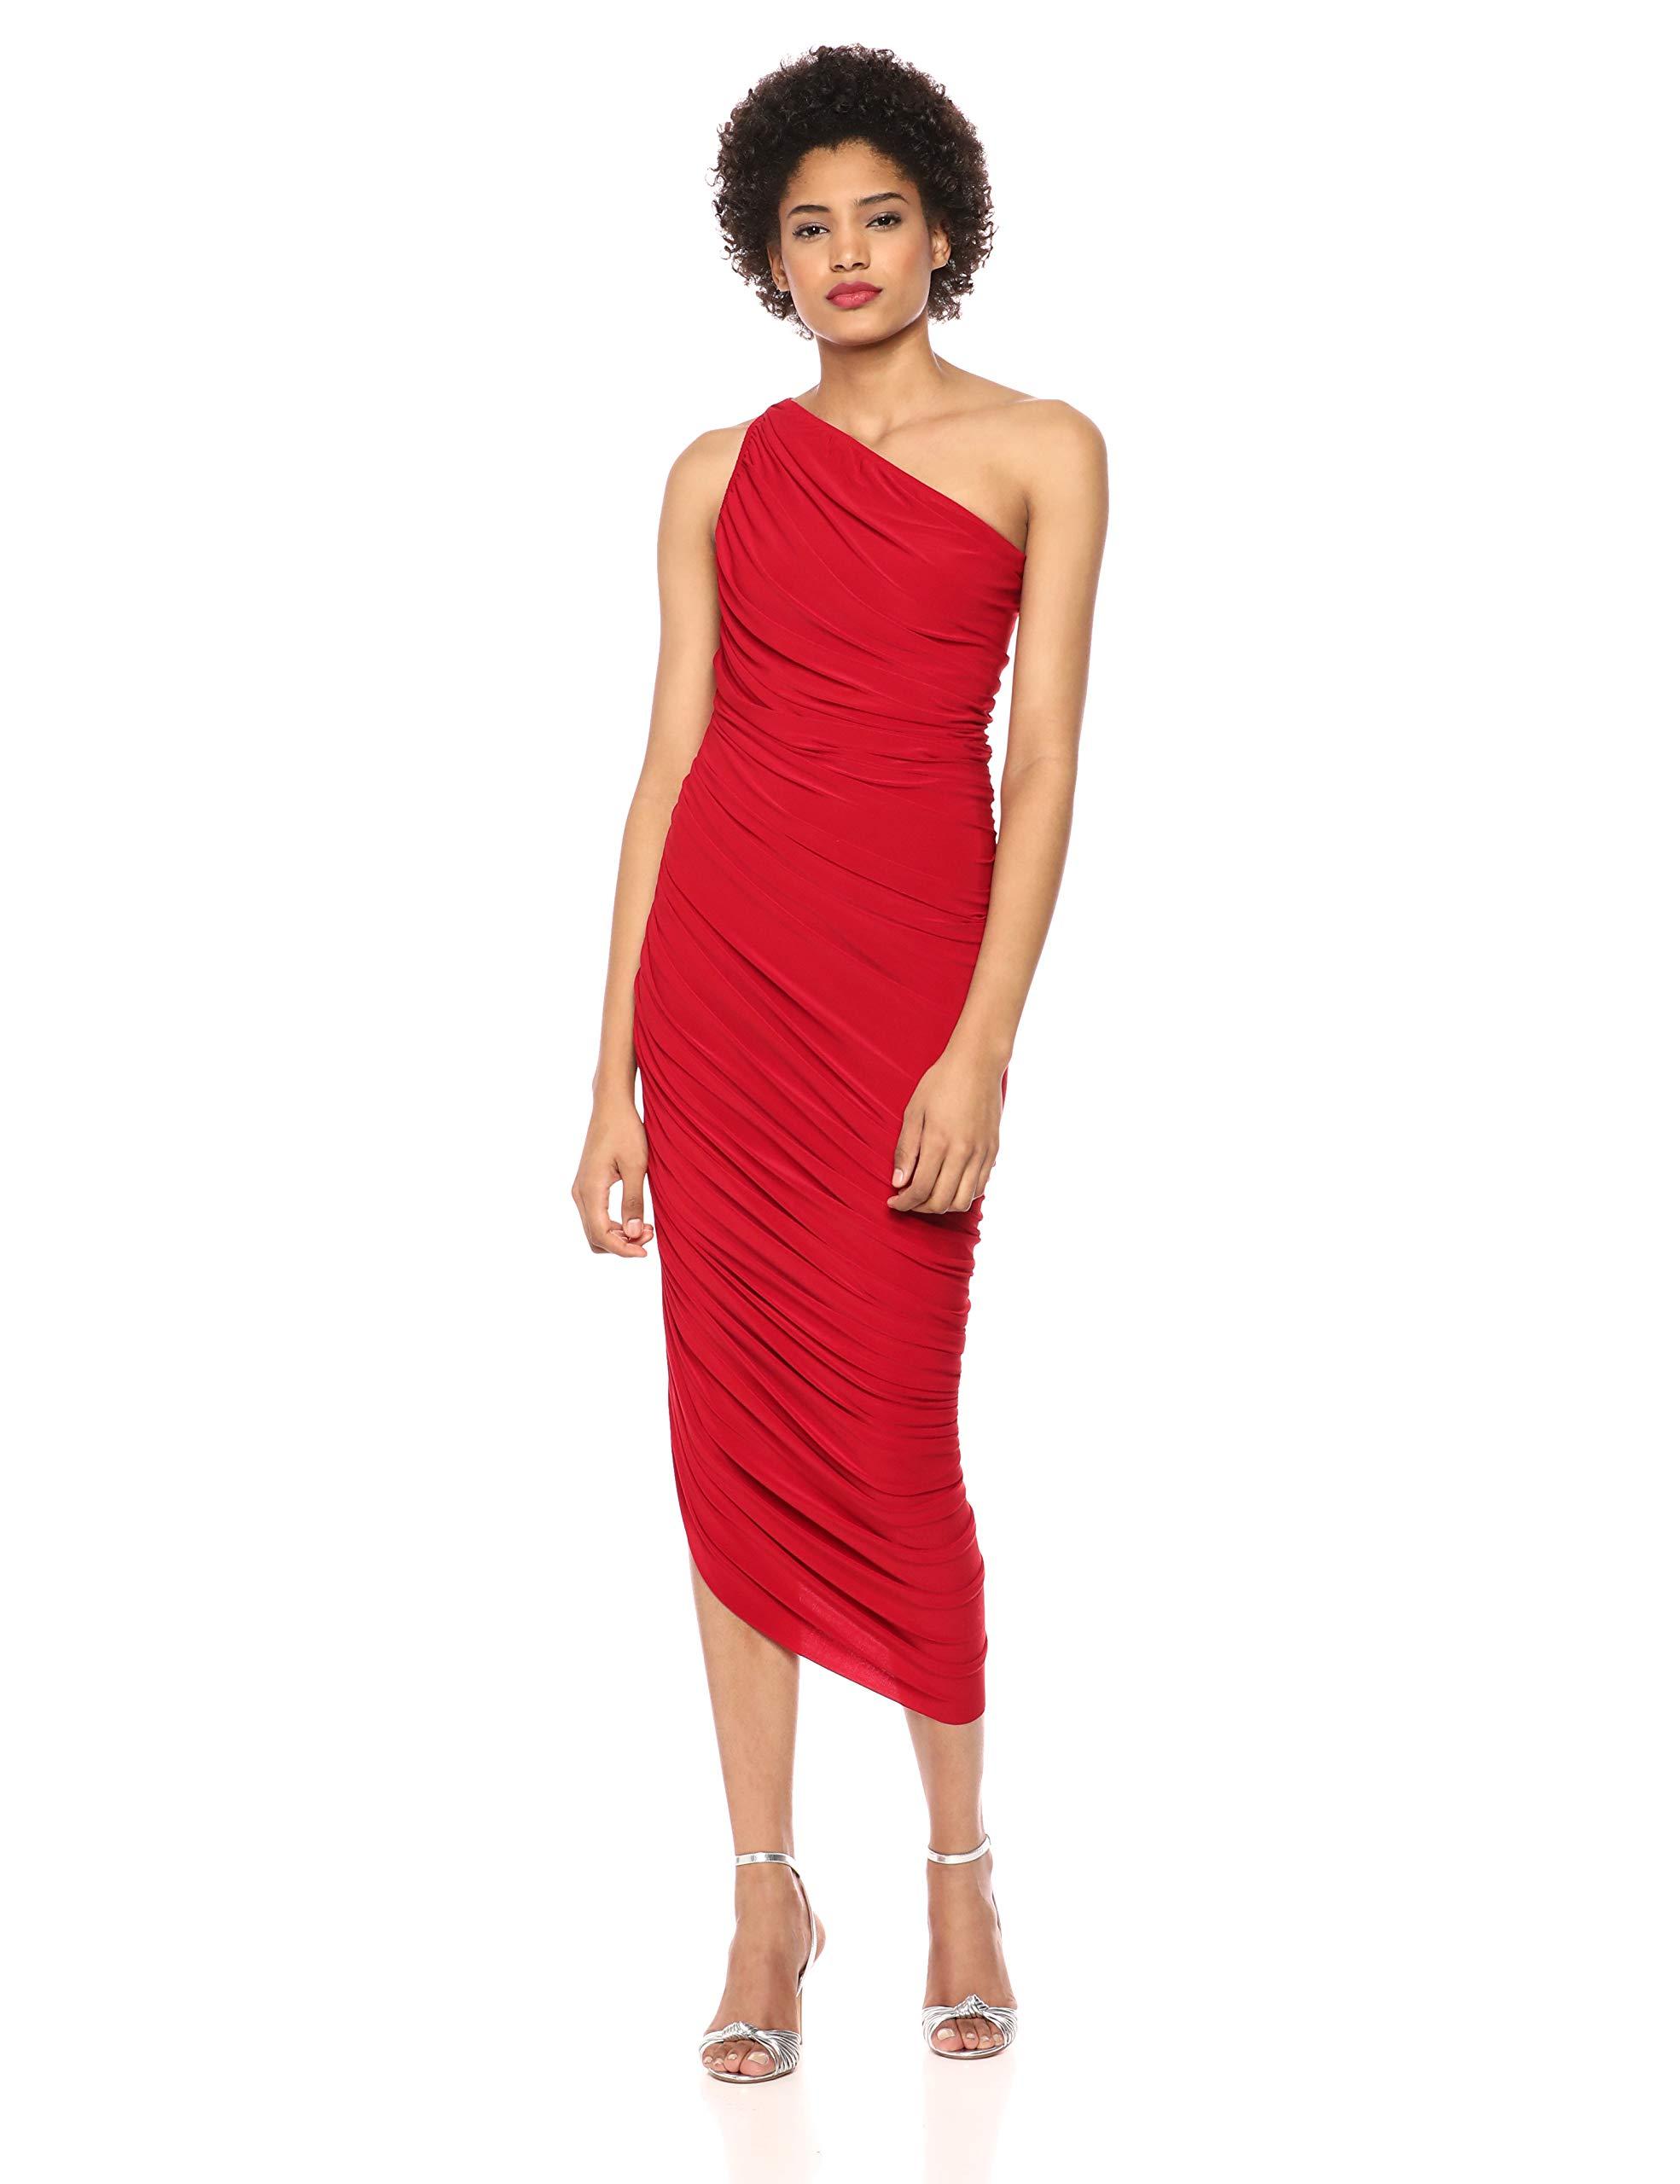 Norma Kamali Diana Gown in Red - Lyst